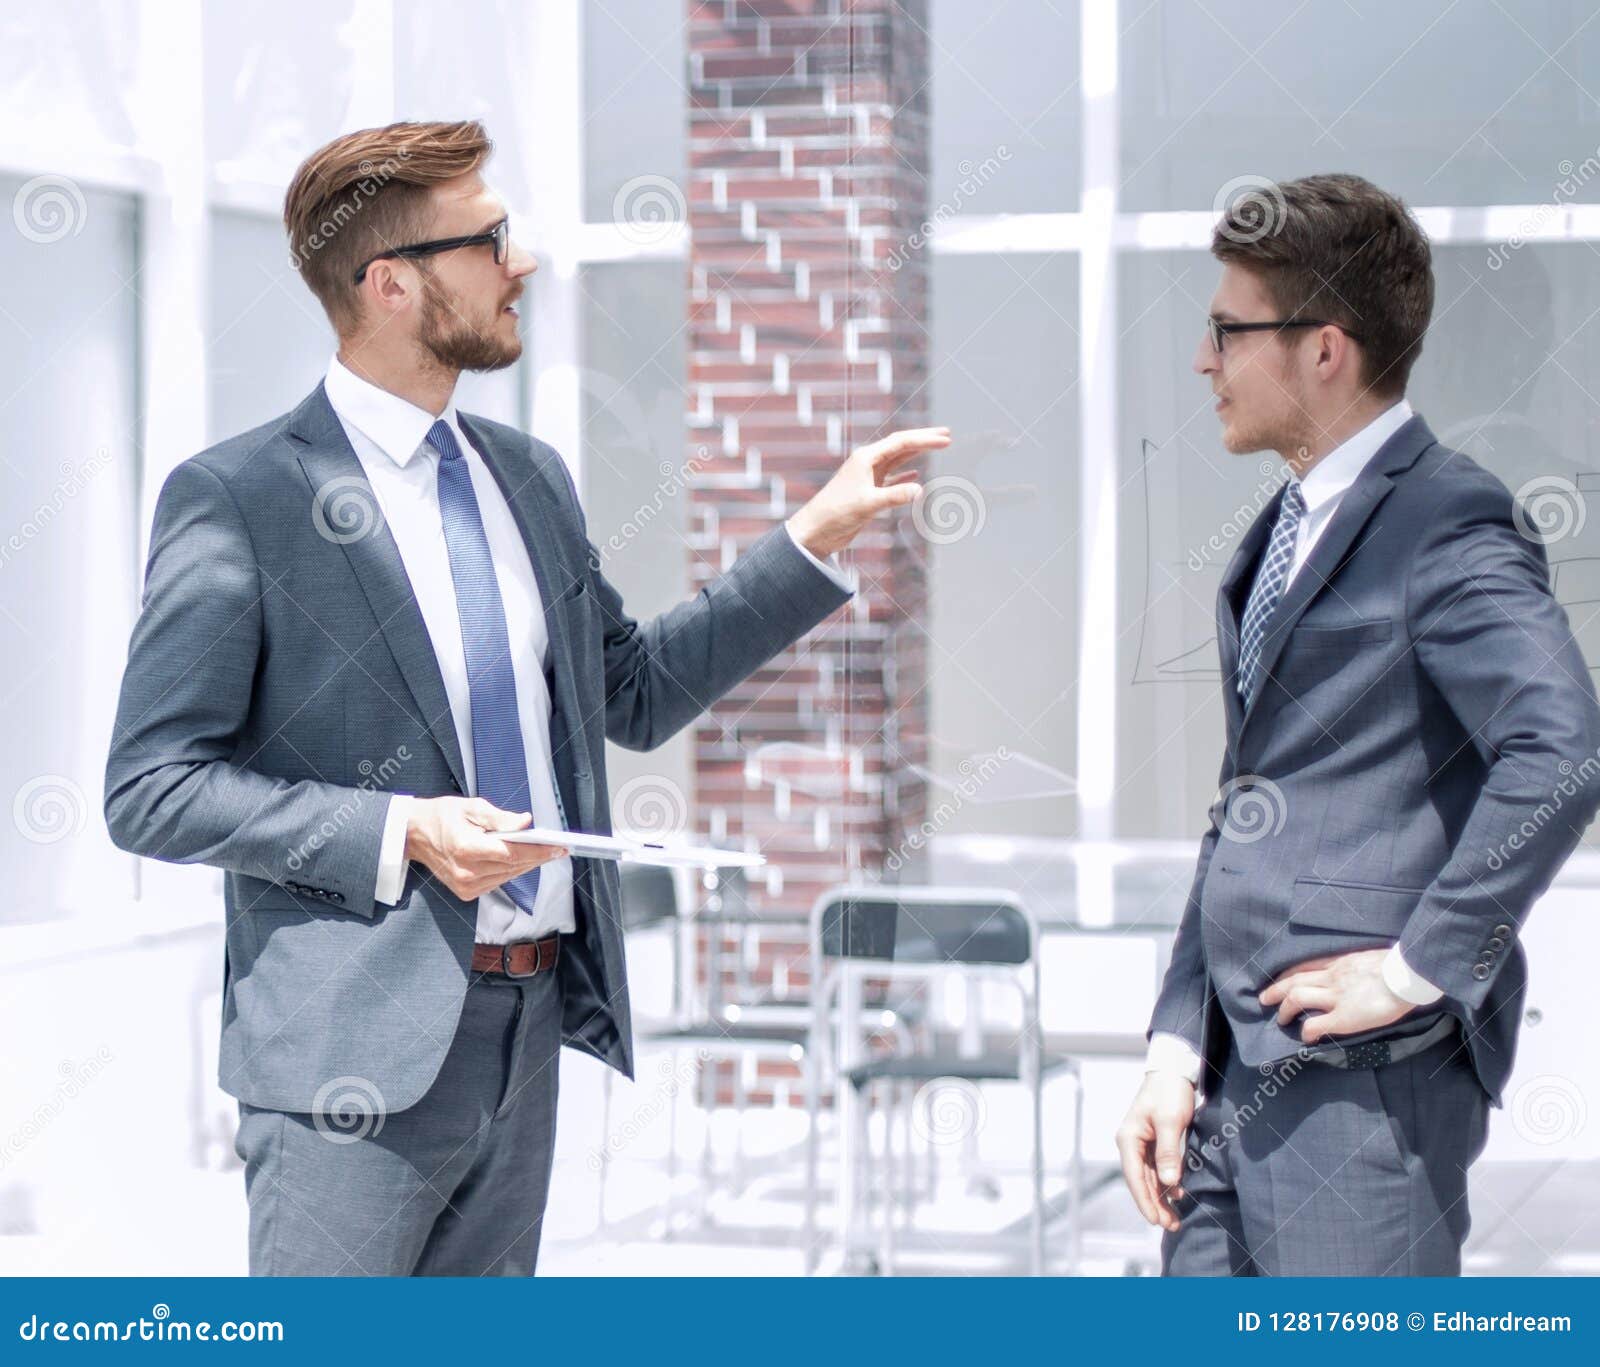 Boss Talking To an Employee in Office Stock Photo - Image of business, manager: 128176908